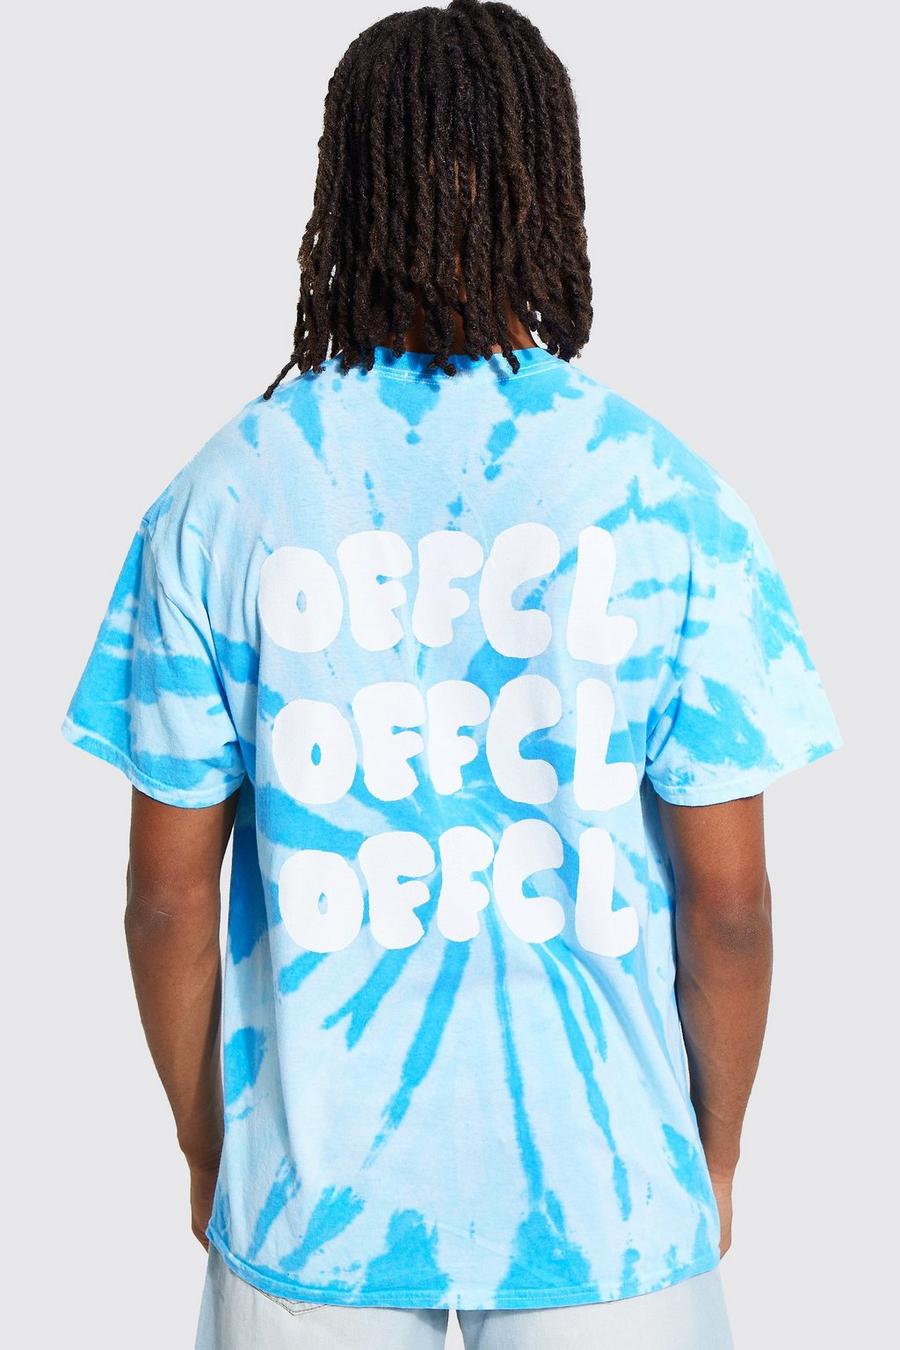 T-shirt oversize in fantasia tie dye con stampa Offcl sul retro, Blue image number 1